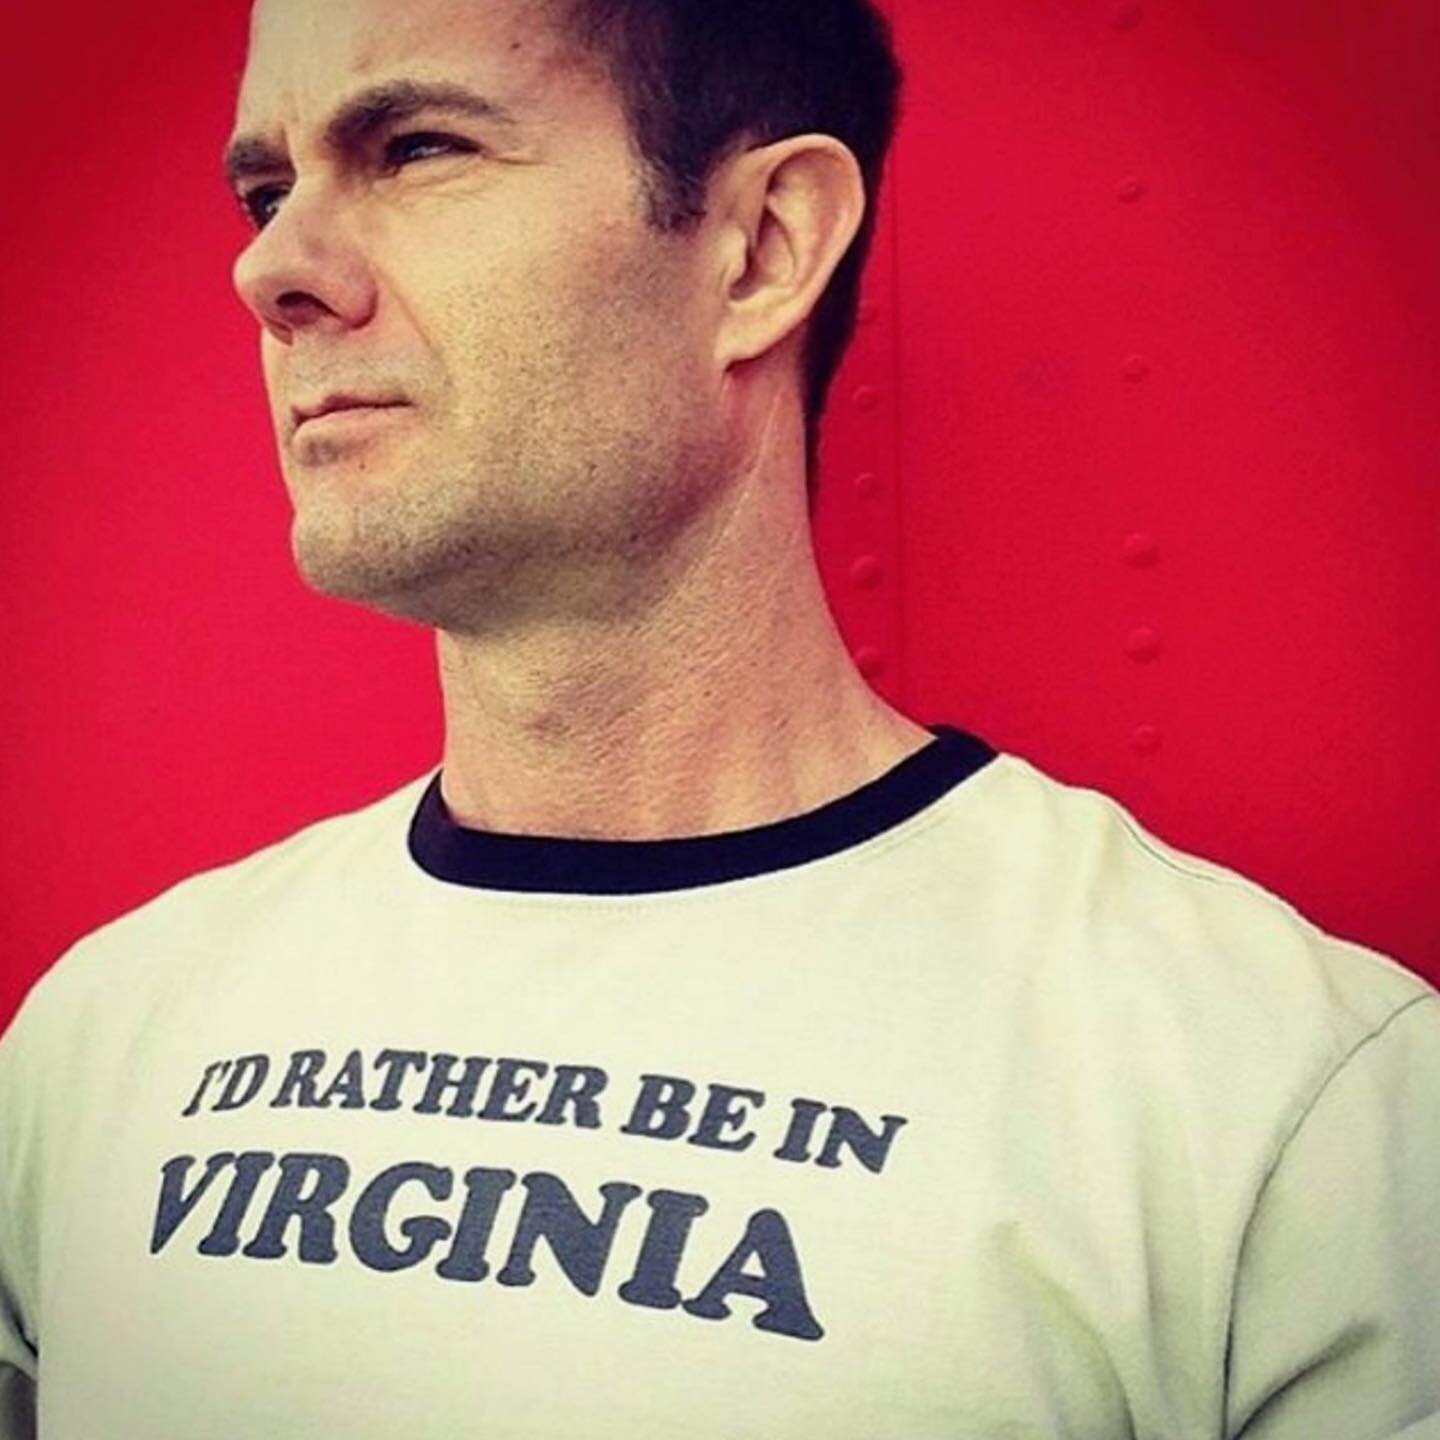 Happy Birthday to the one and only  @GarretDillahunt .
.
.
.
.
.
.
#raisinghope #deadwood #12yearsaslave #TheMindyShow #HandofGod #Justified #FearTWD #TheGifted #NoCountryForOldMen #OneLifeToLive